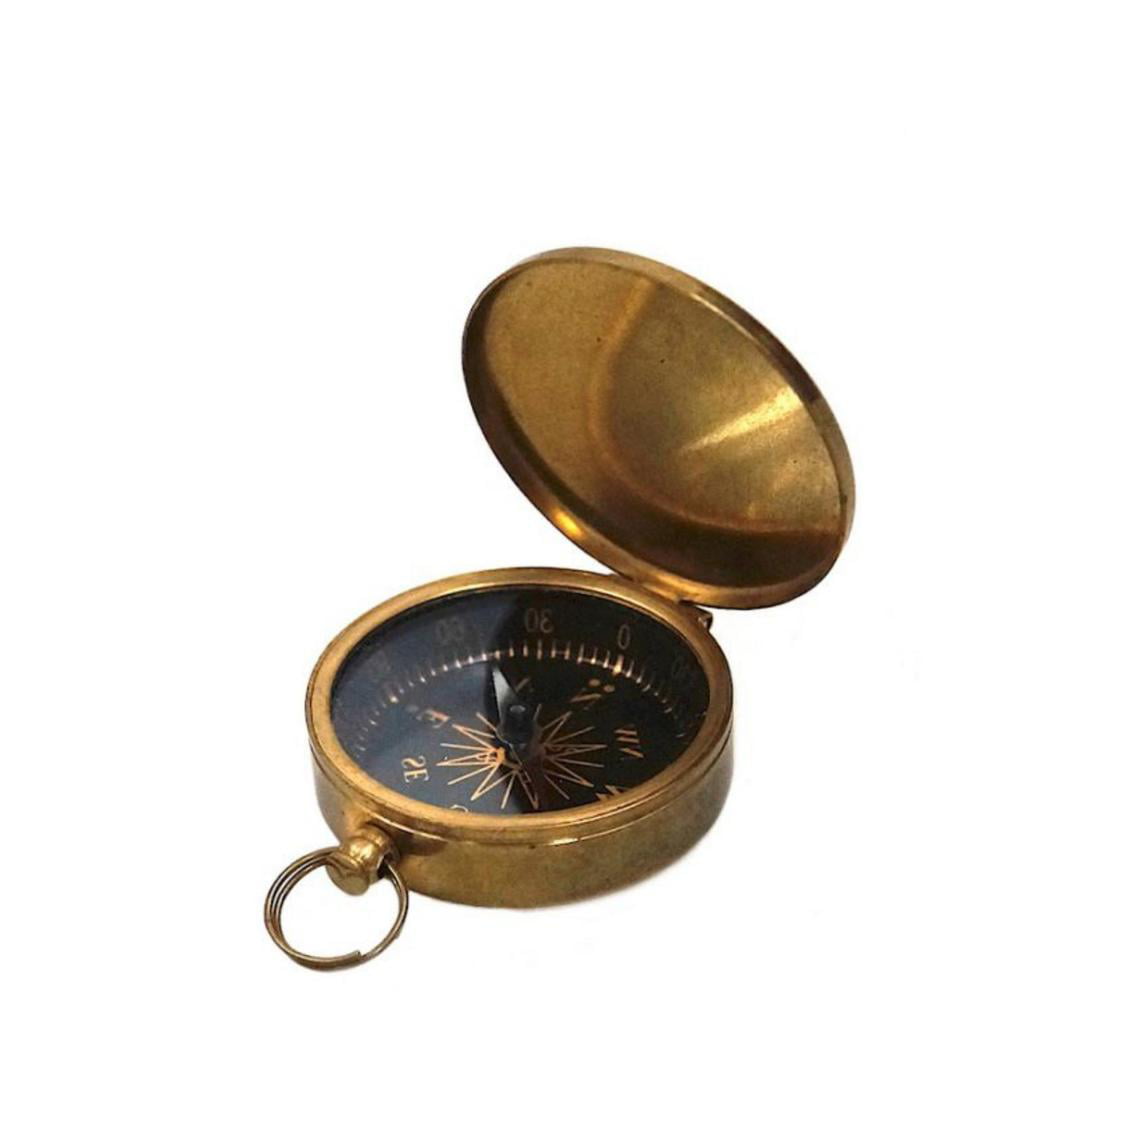 Antique Finish Brass Compass With Lid Nautical Marine Old Vintage Pocket Style 